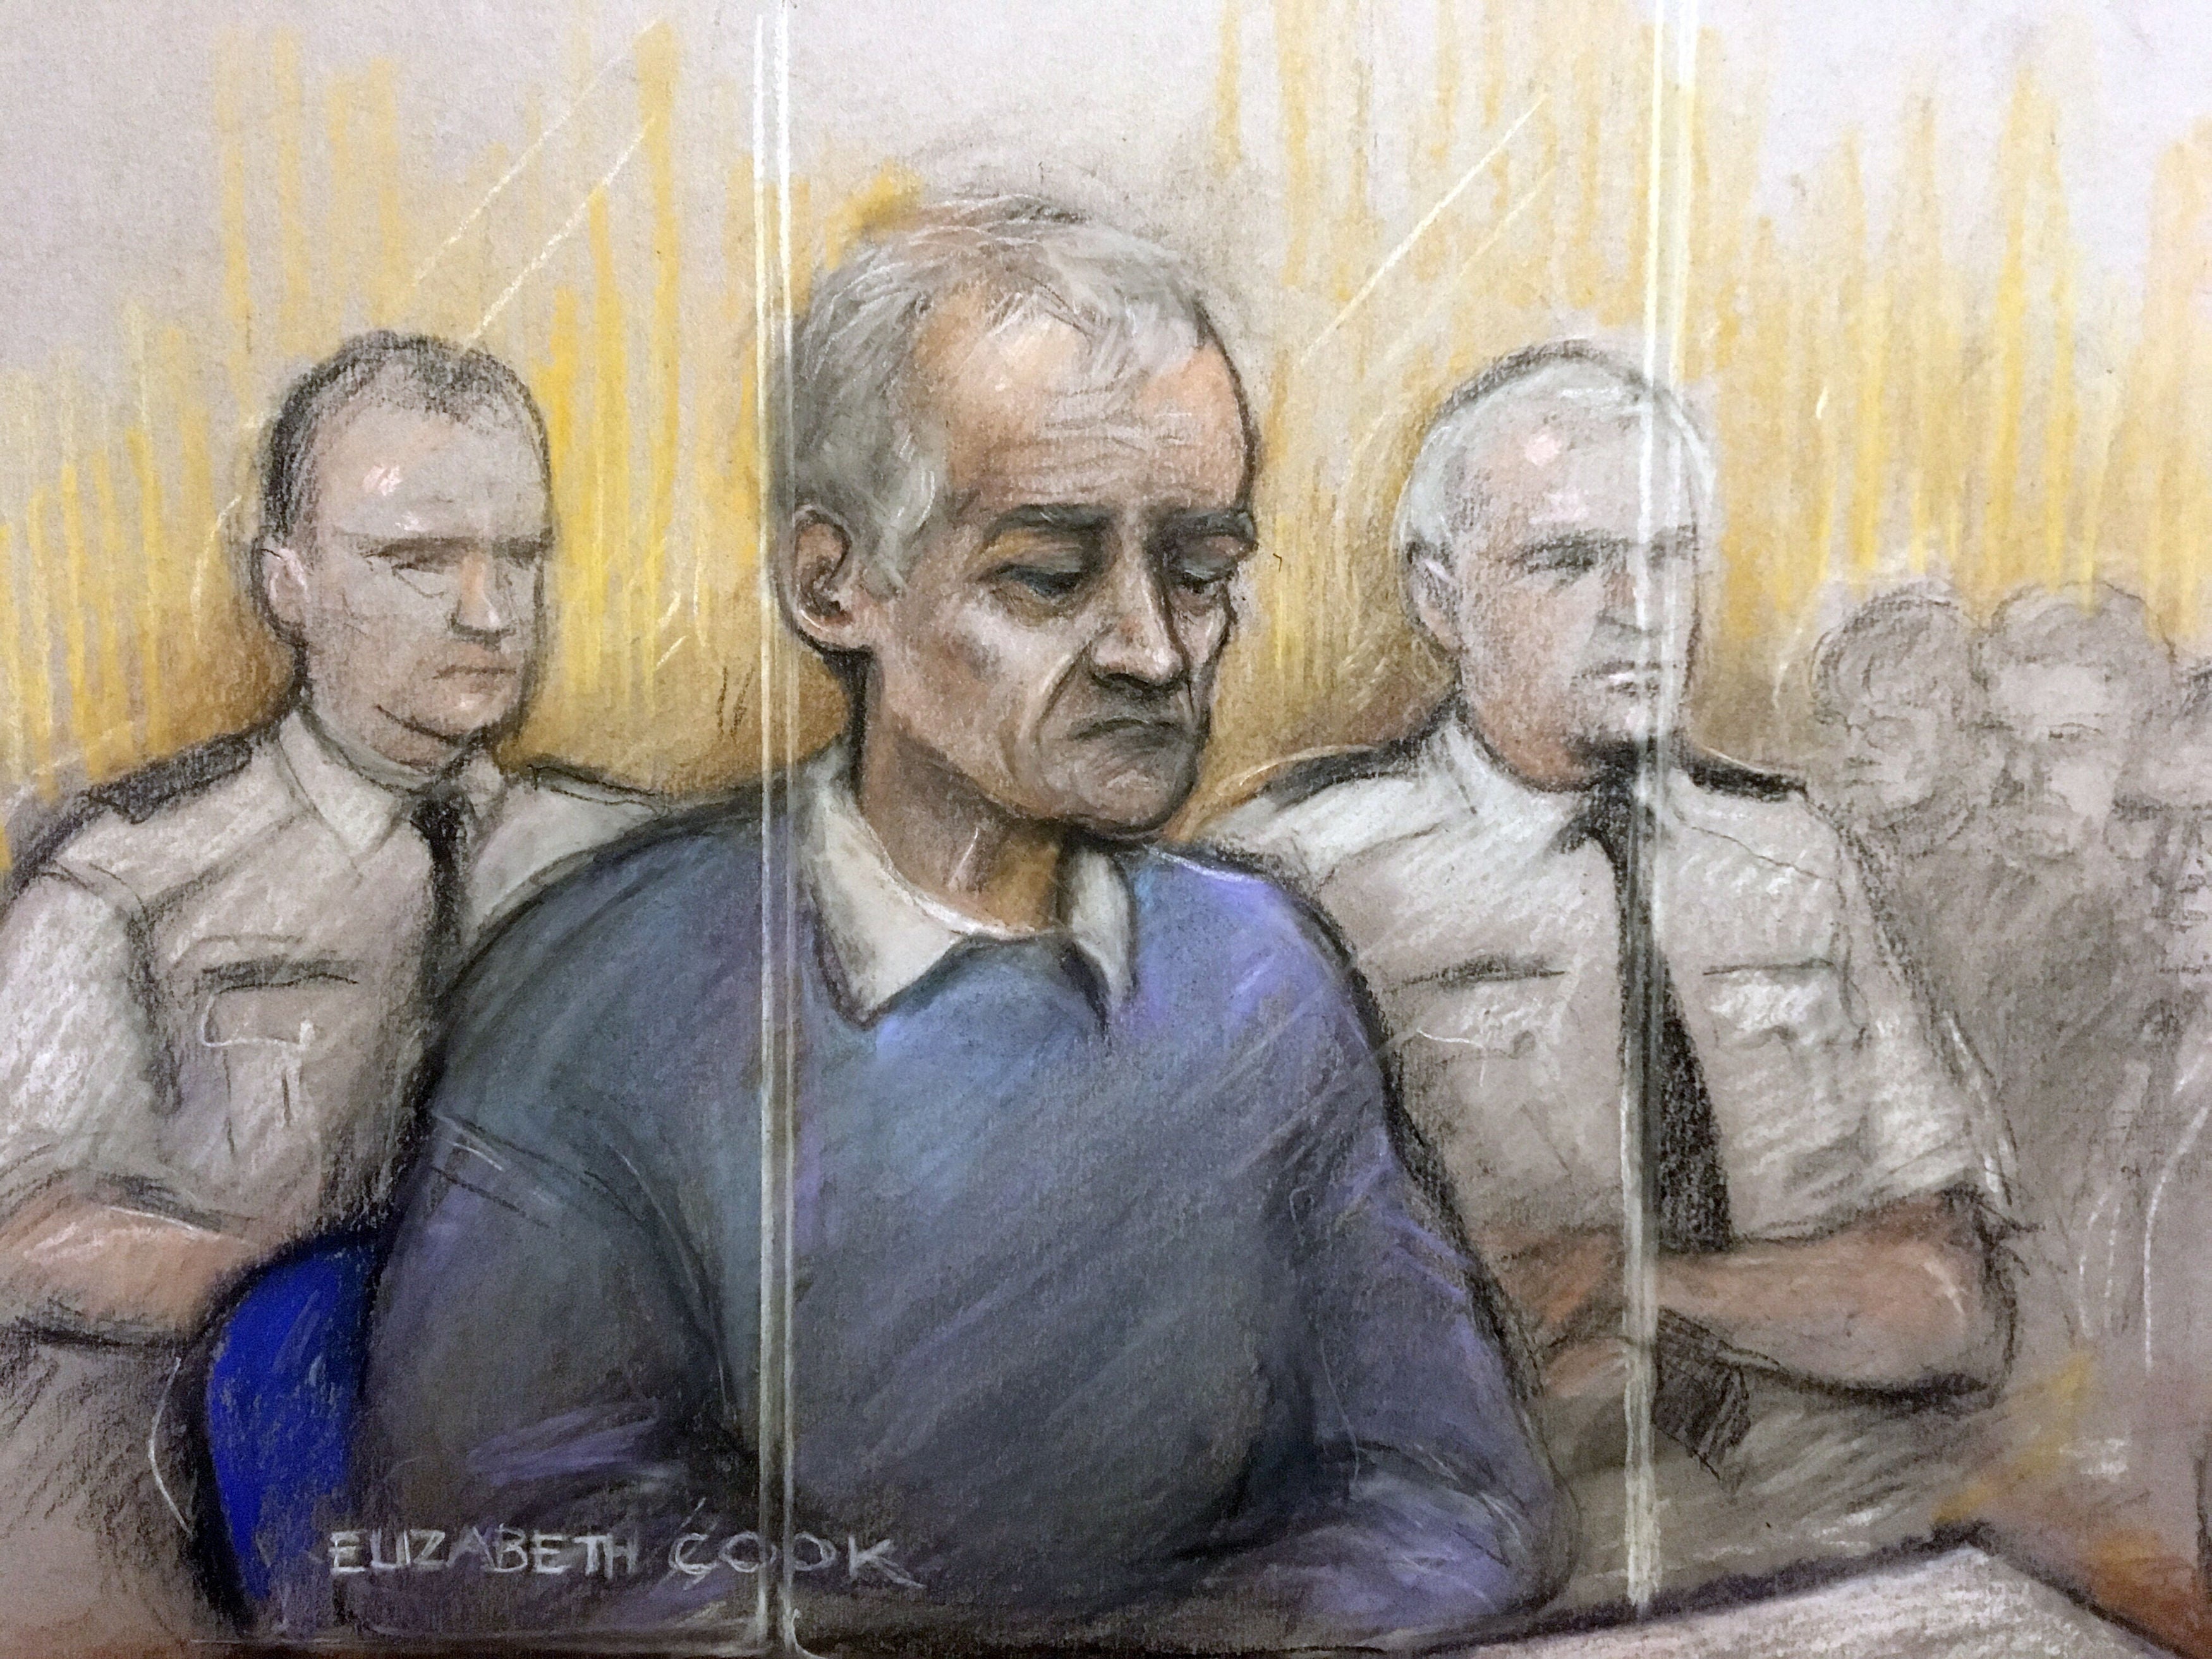 Barry Bennell was jailed by a judge at Liverpool Crown Court for abusing boys (Elizabeth Cook/PA)